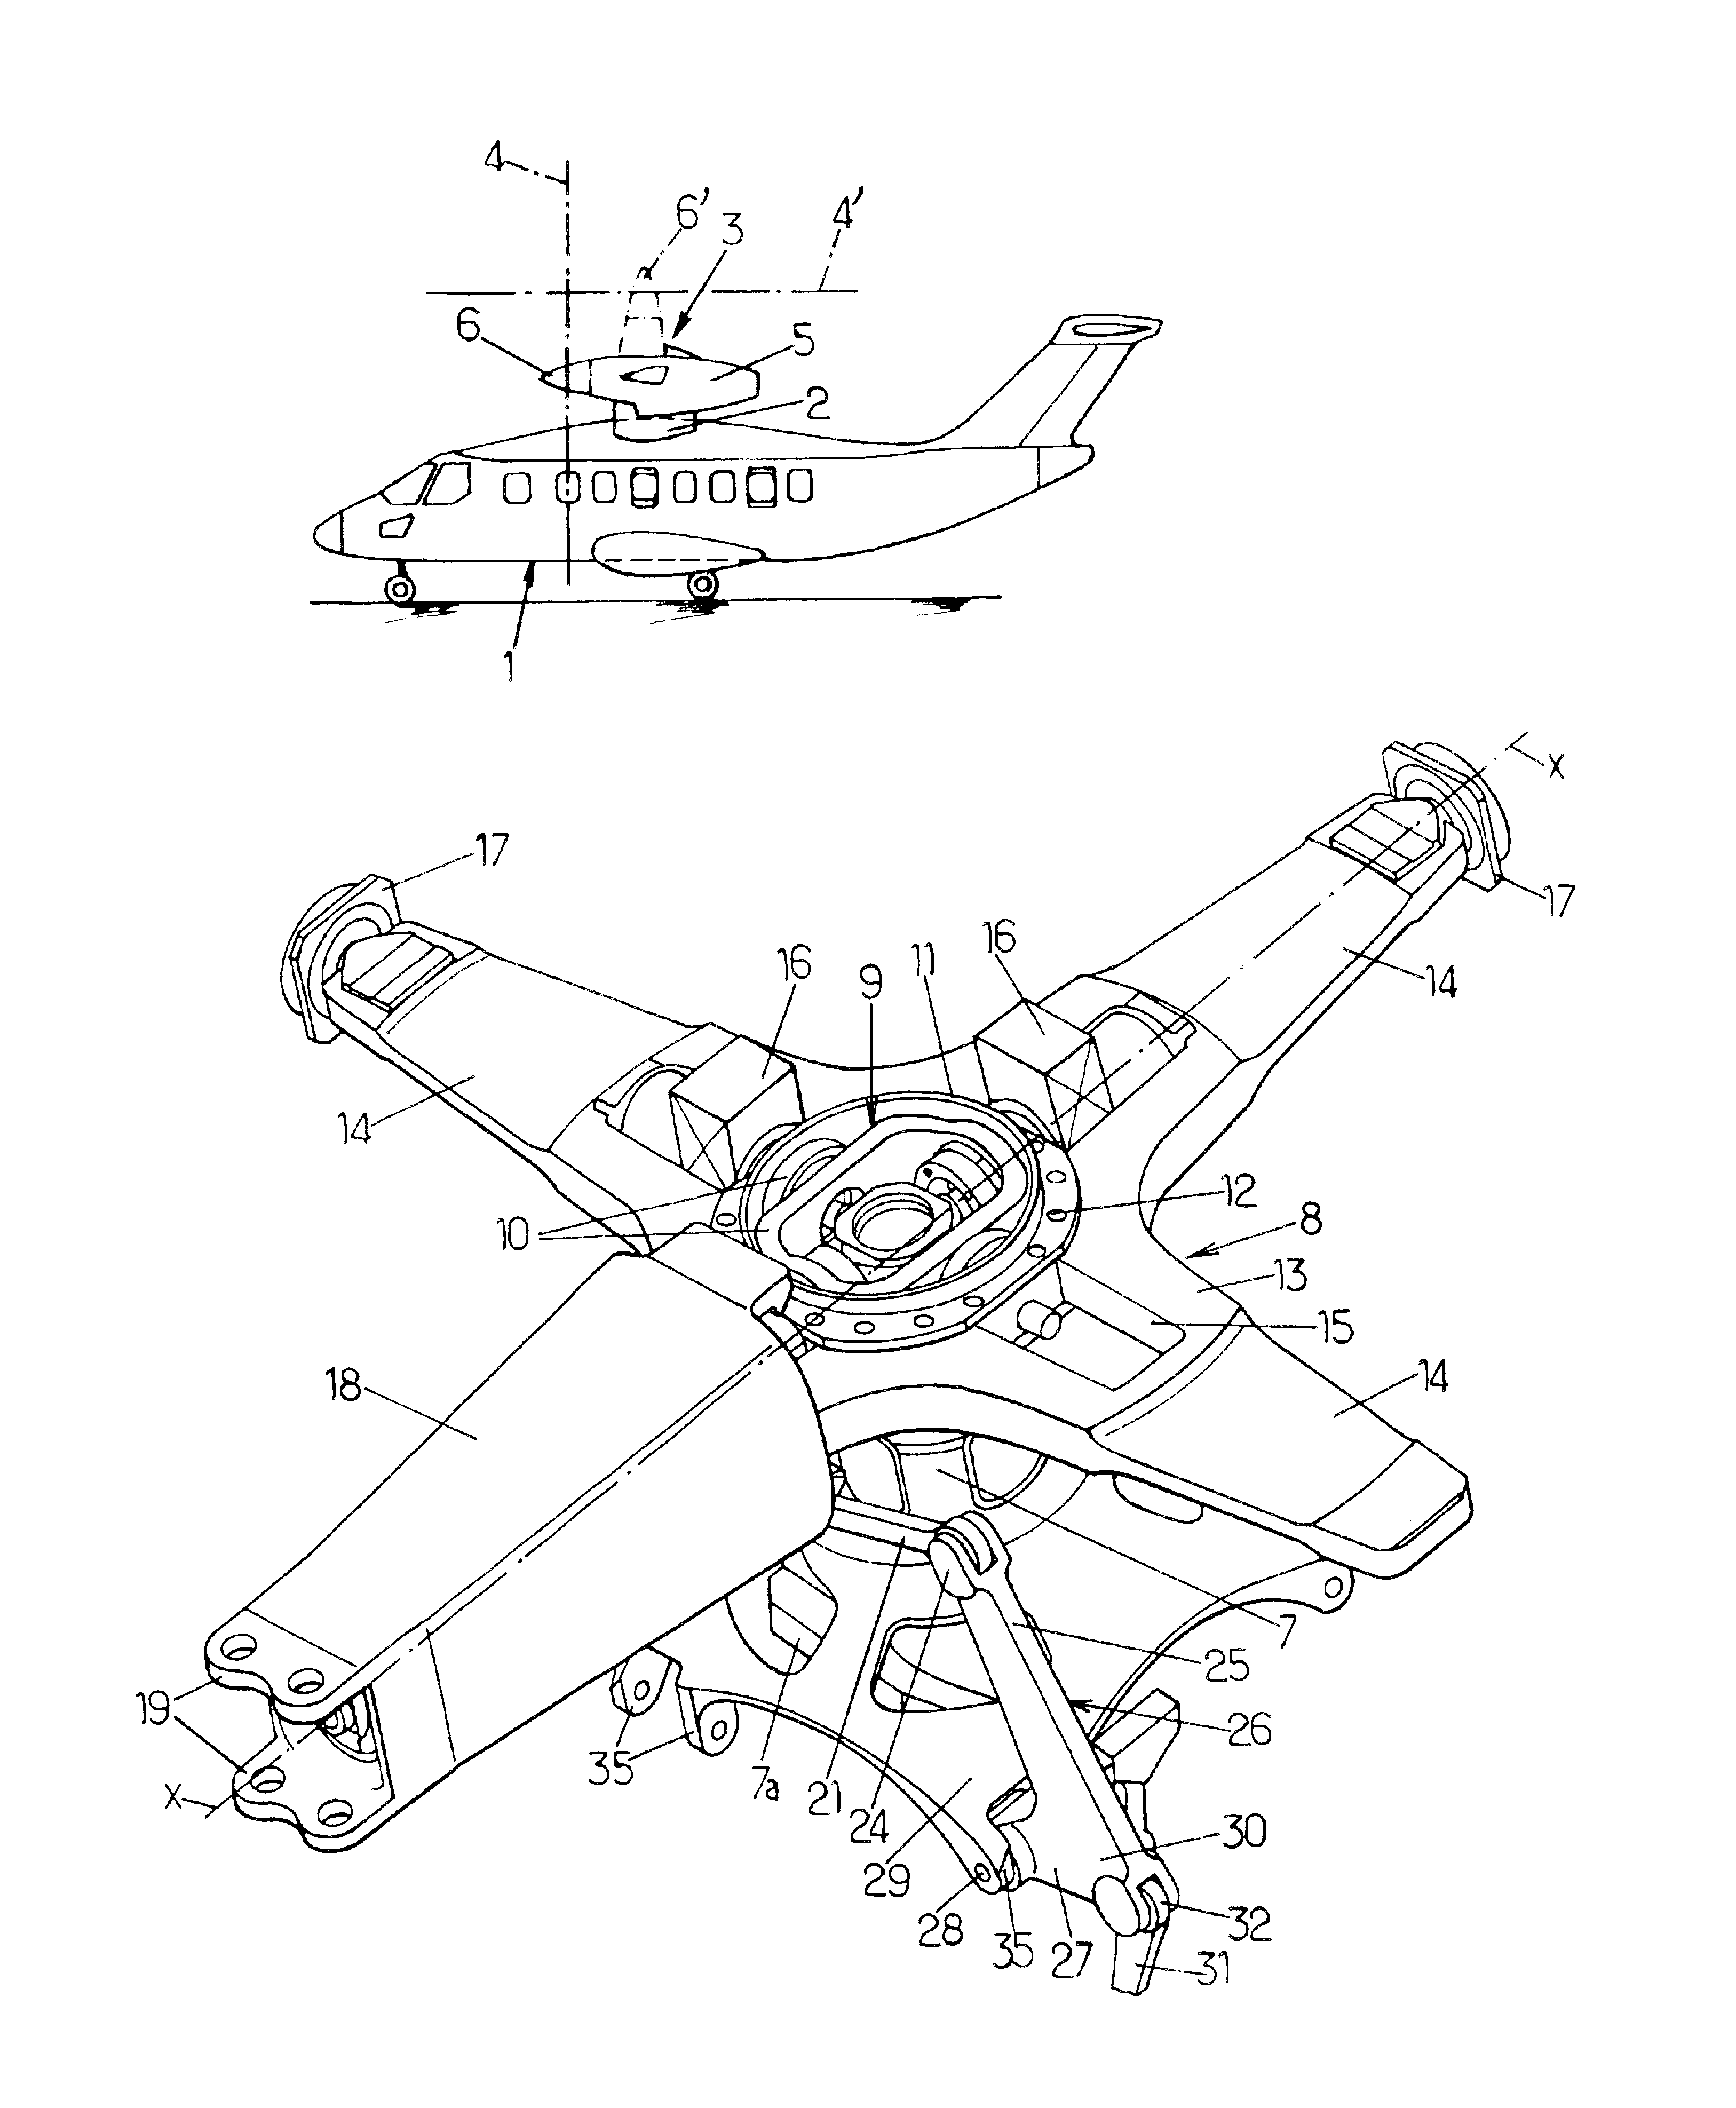 Device for controlling the pitch of the blades of a convertible aircraft rotor